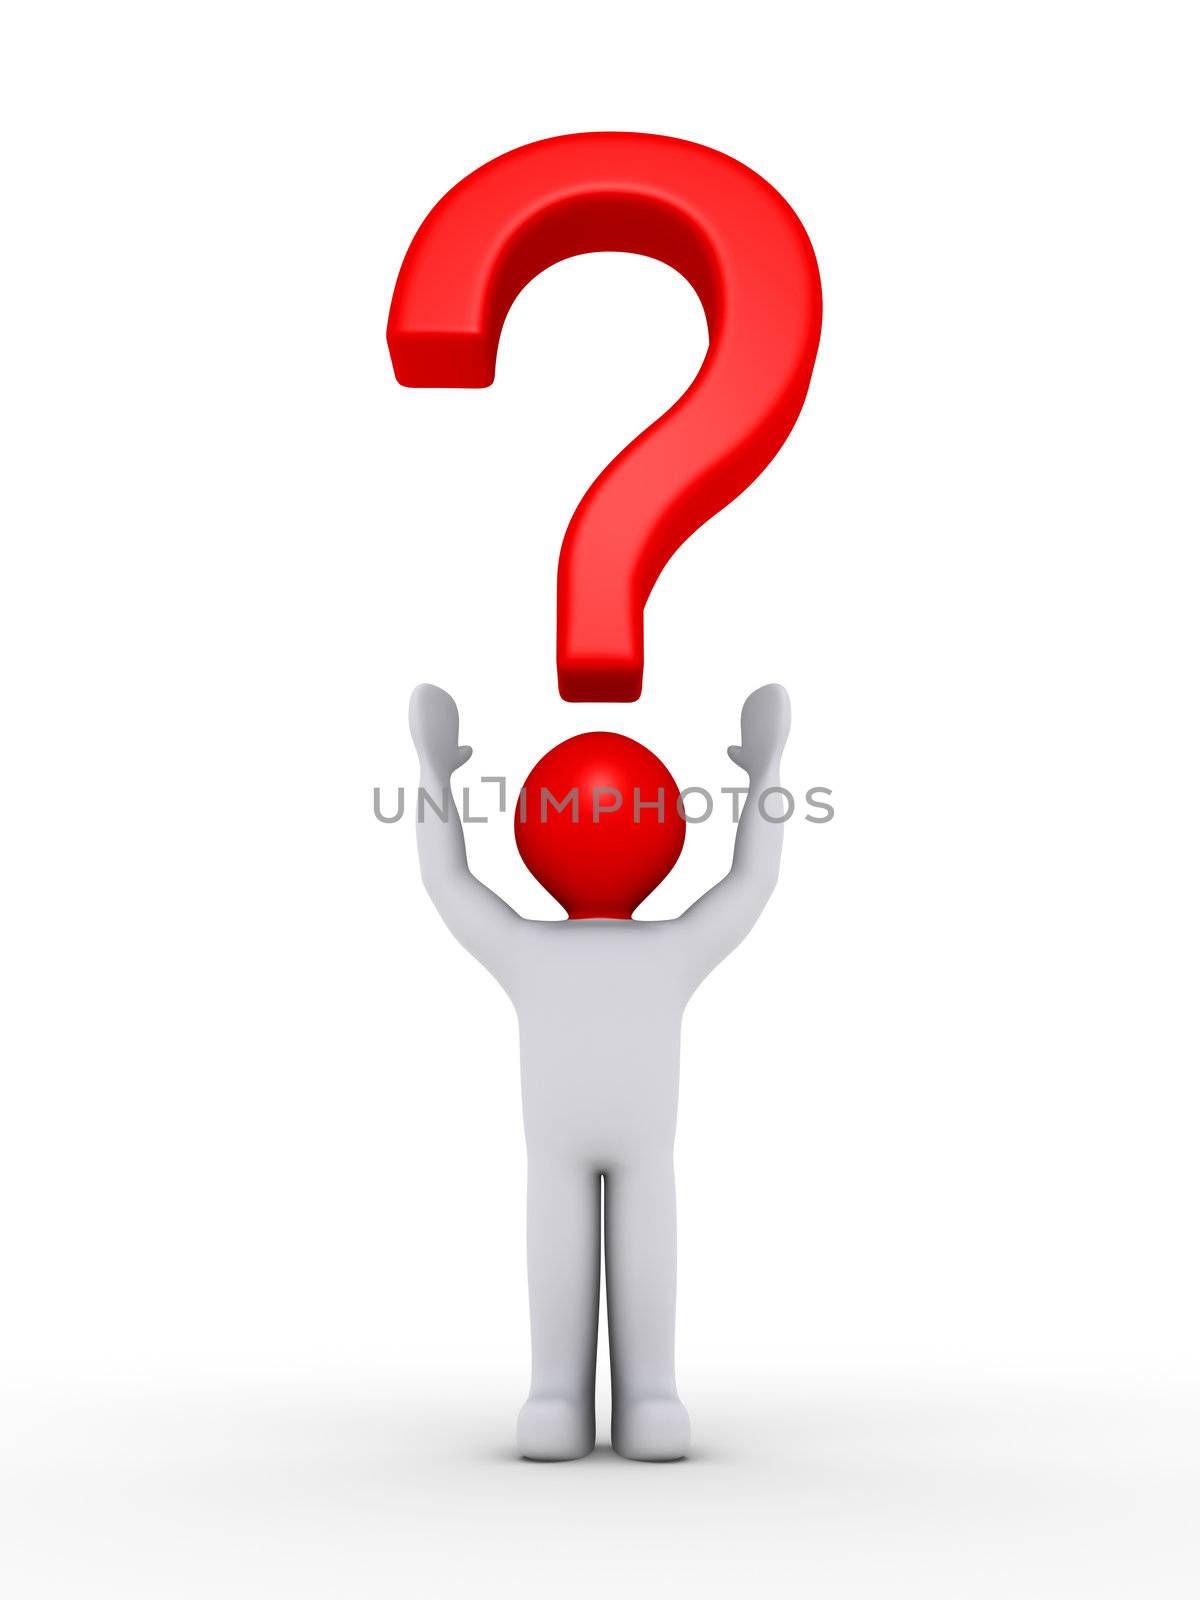 Person with question mark symbol over his head by 6kor3dos